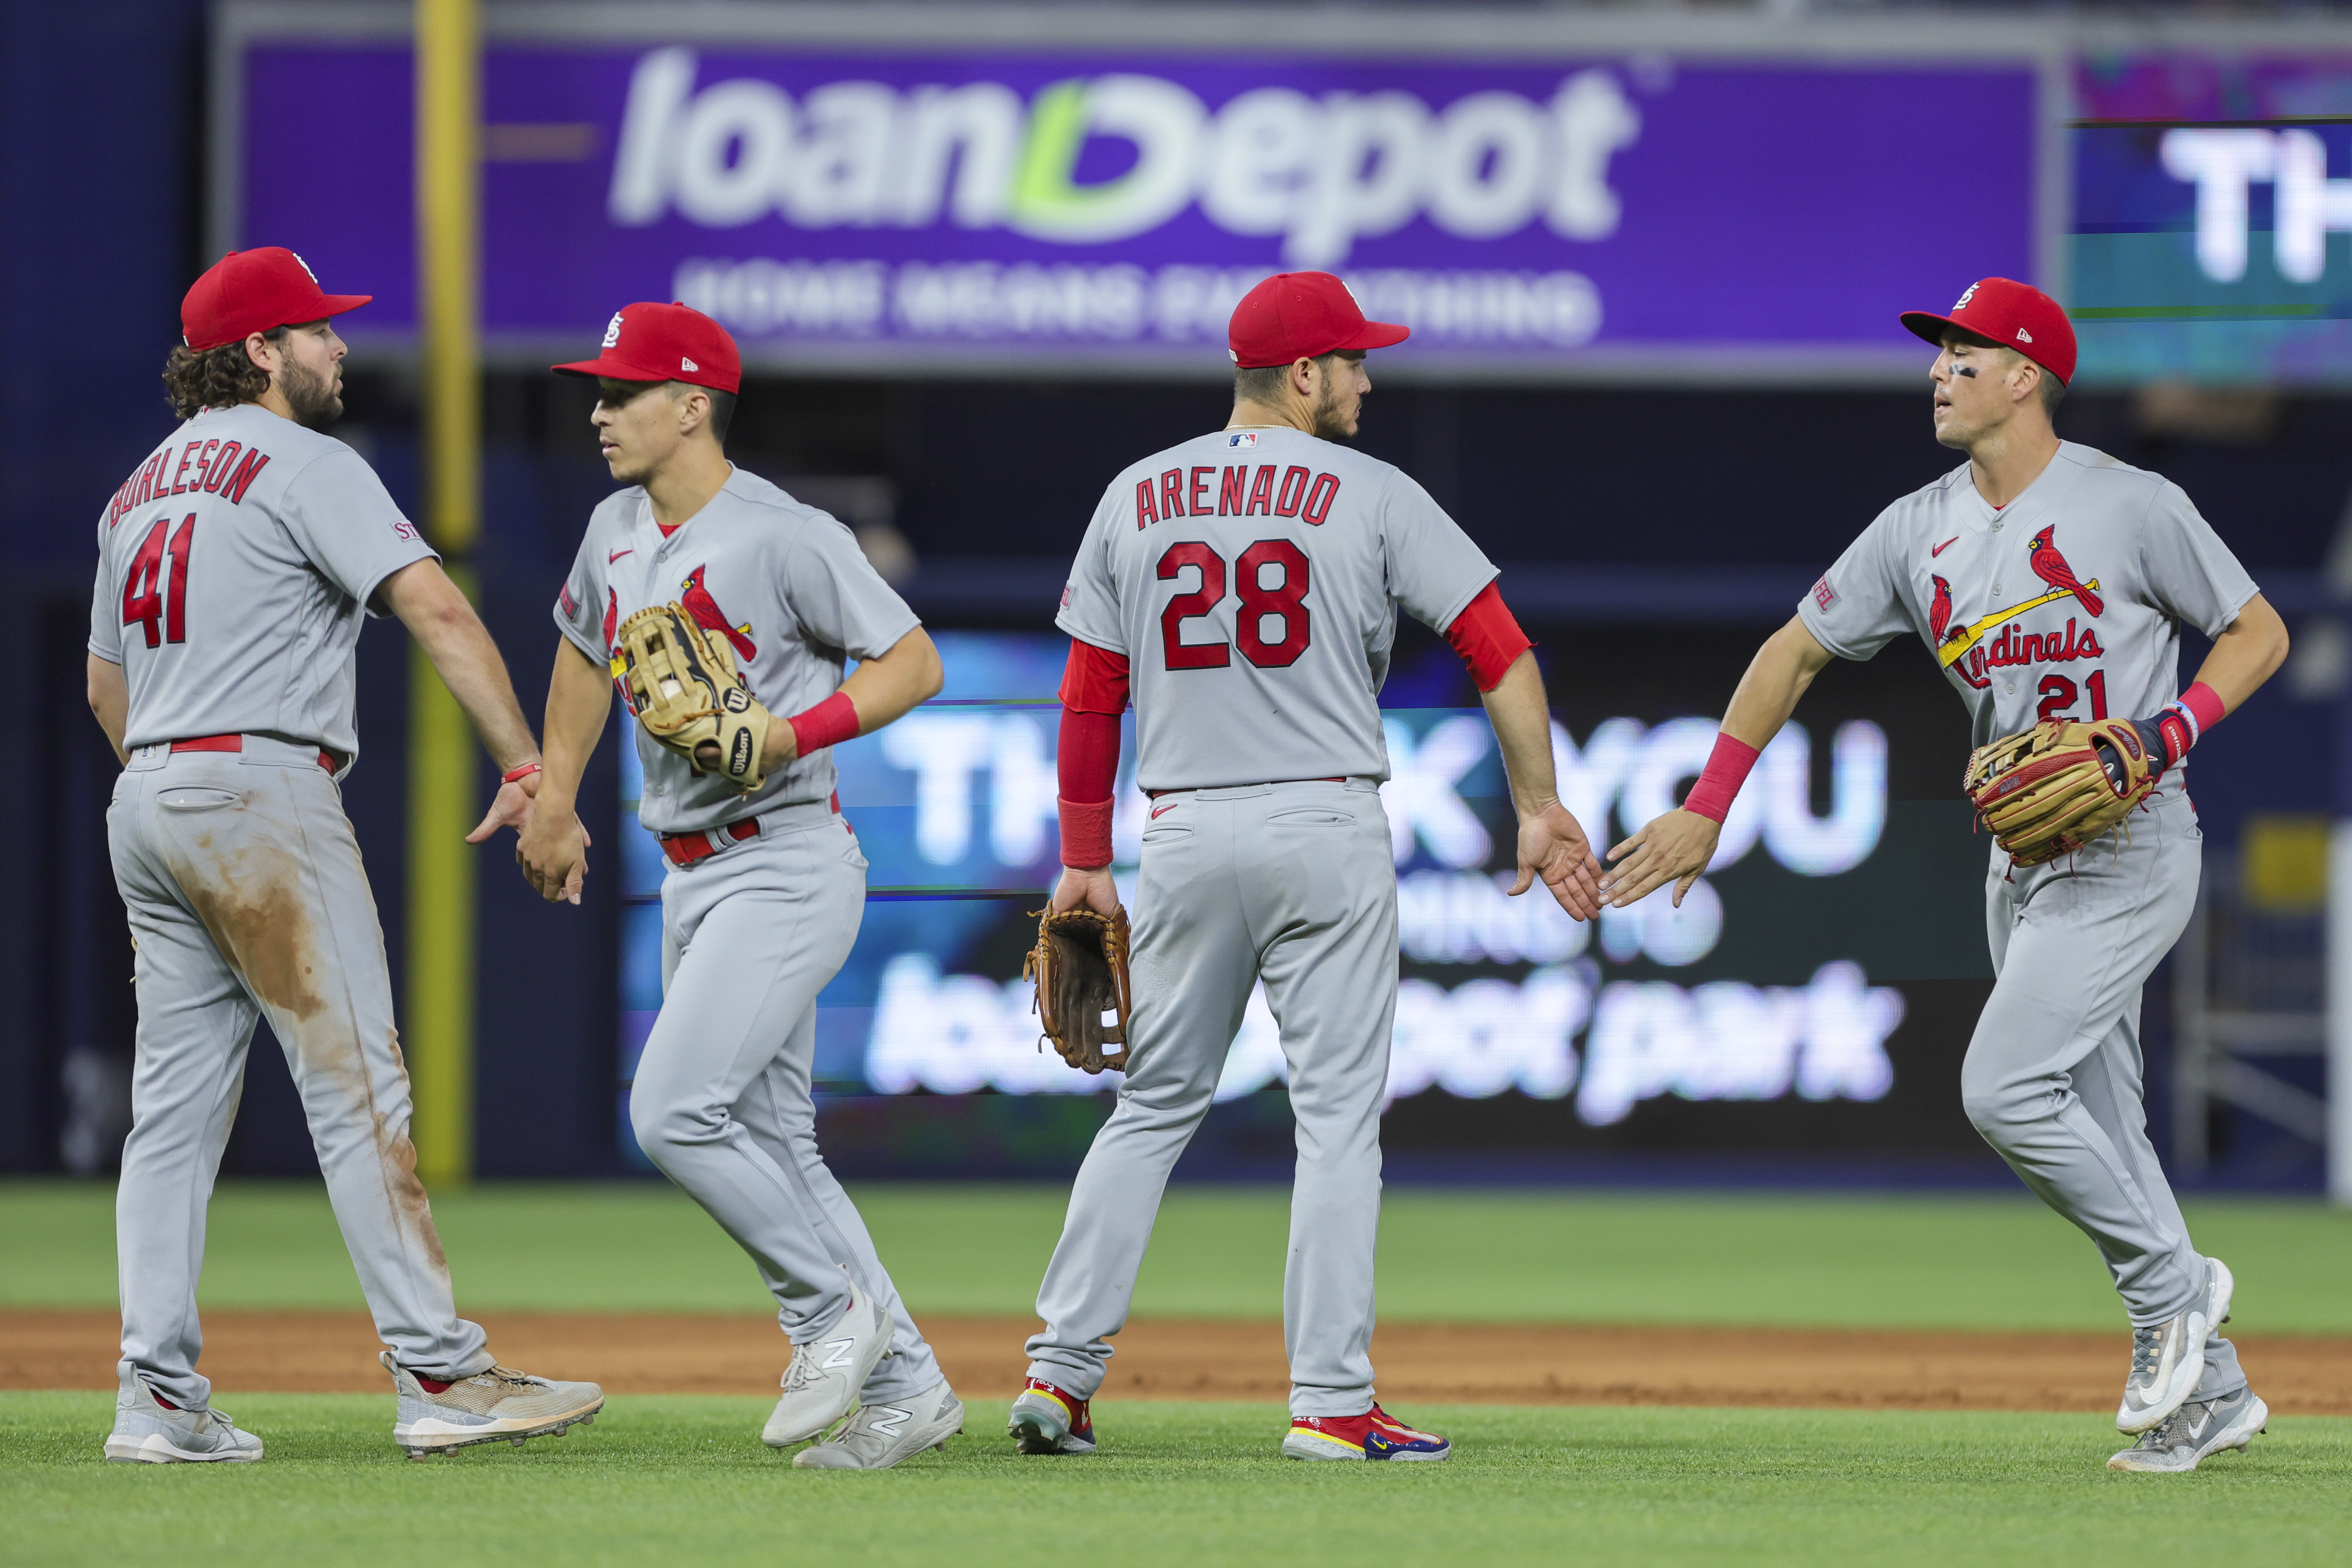 Arenado homers, Cardinals pitchers blank Marlins to win 3-0 and avoid sweep